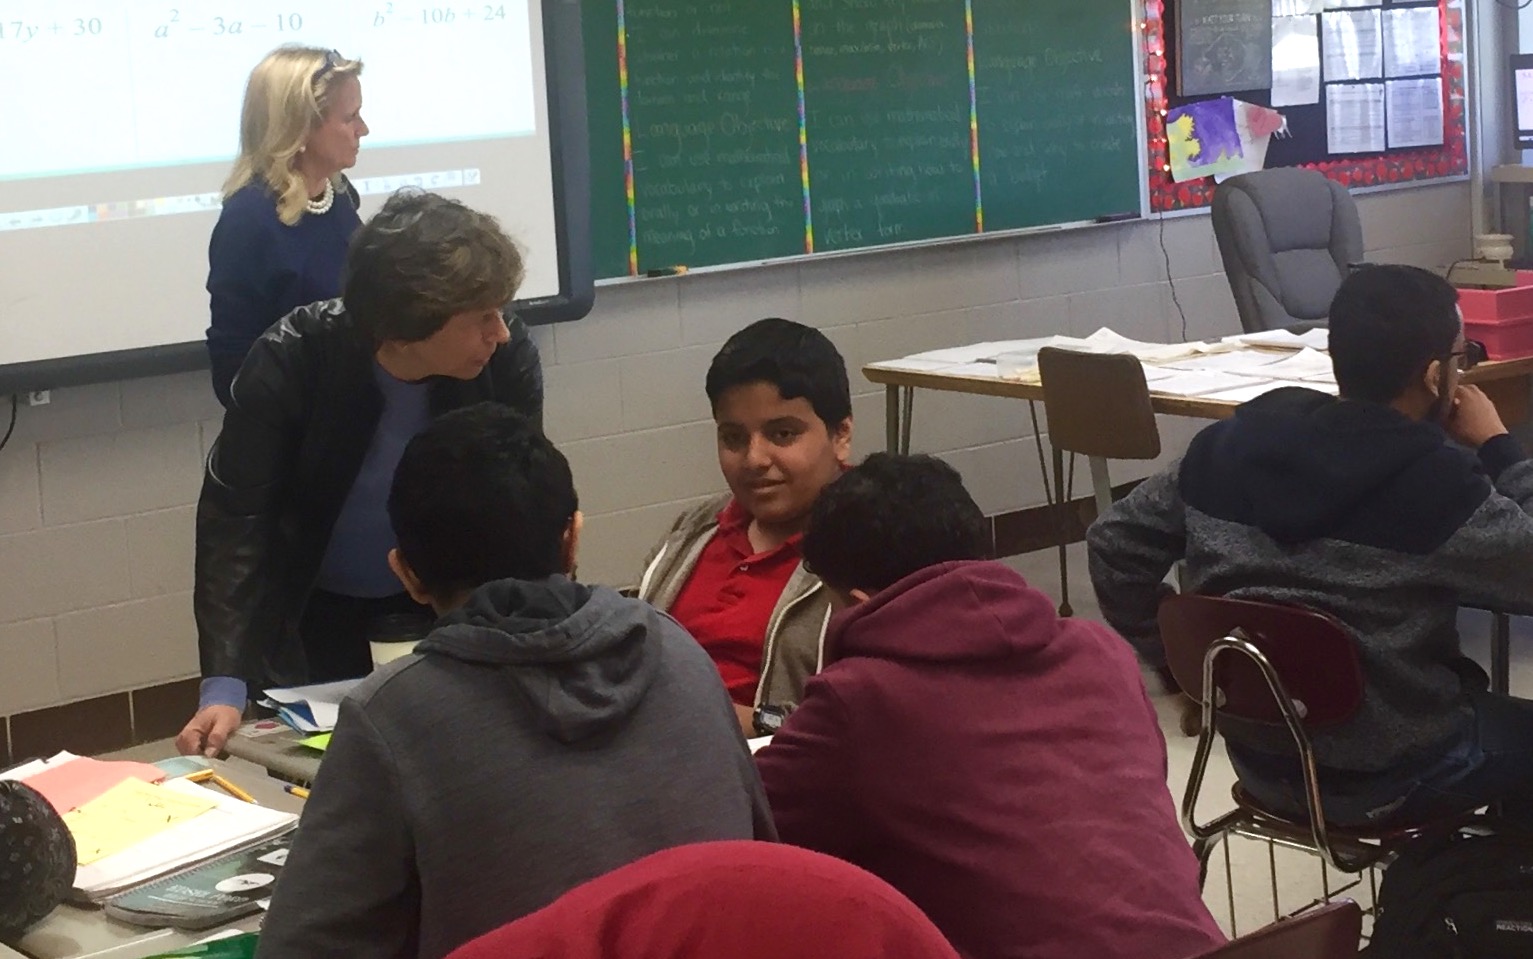 American Federation of Teachers President Randi Weingarten talks to students in a math class for English language learners at Edsel Ford High School in Dearborn, Michigan.